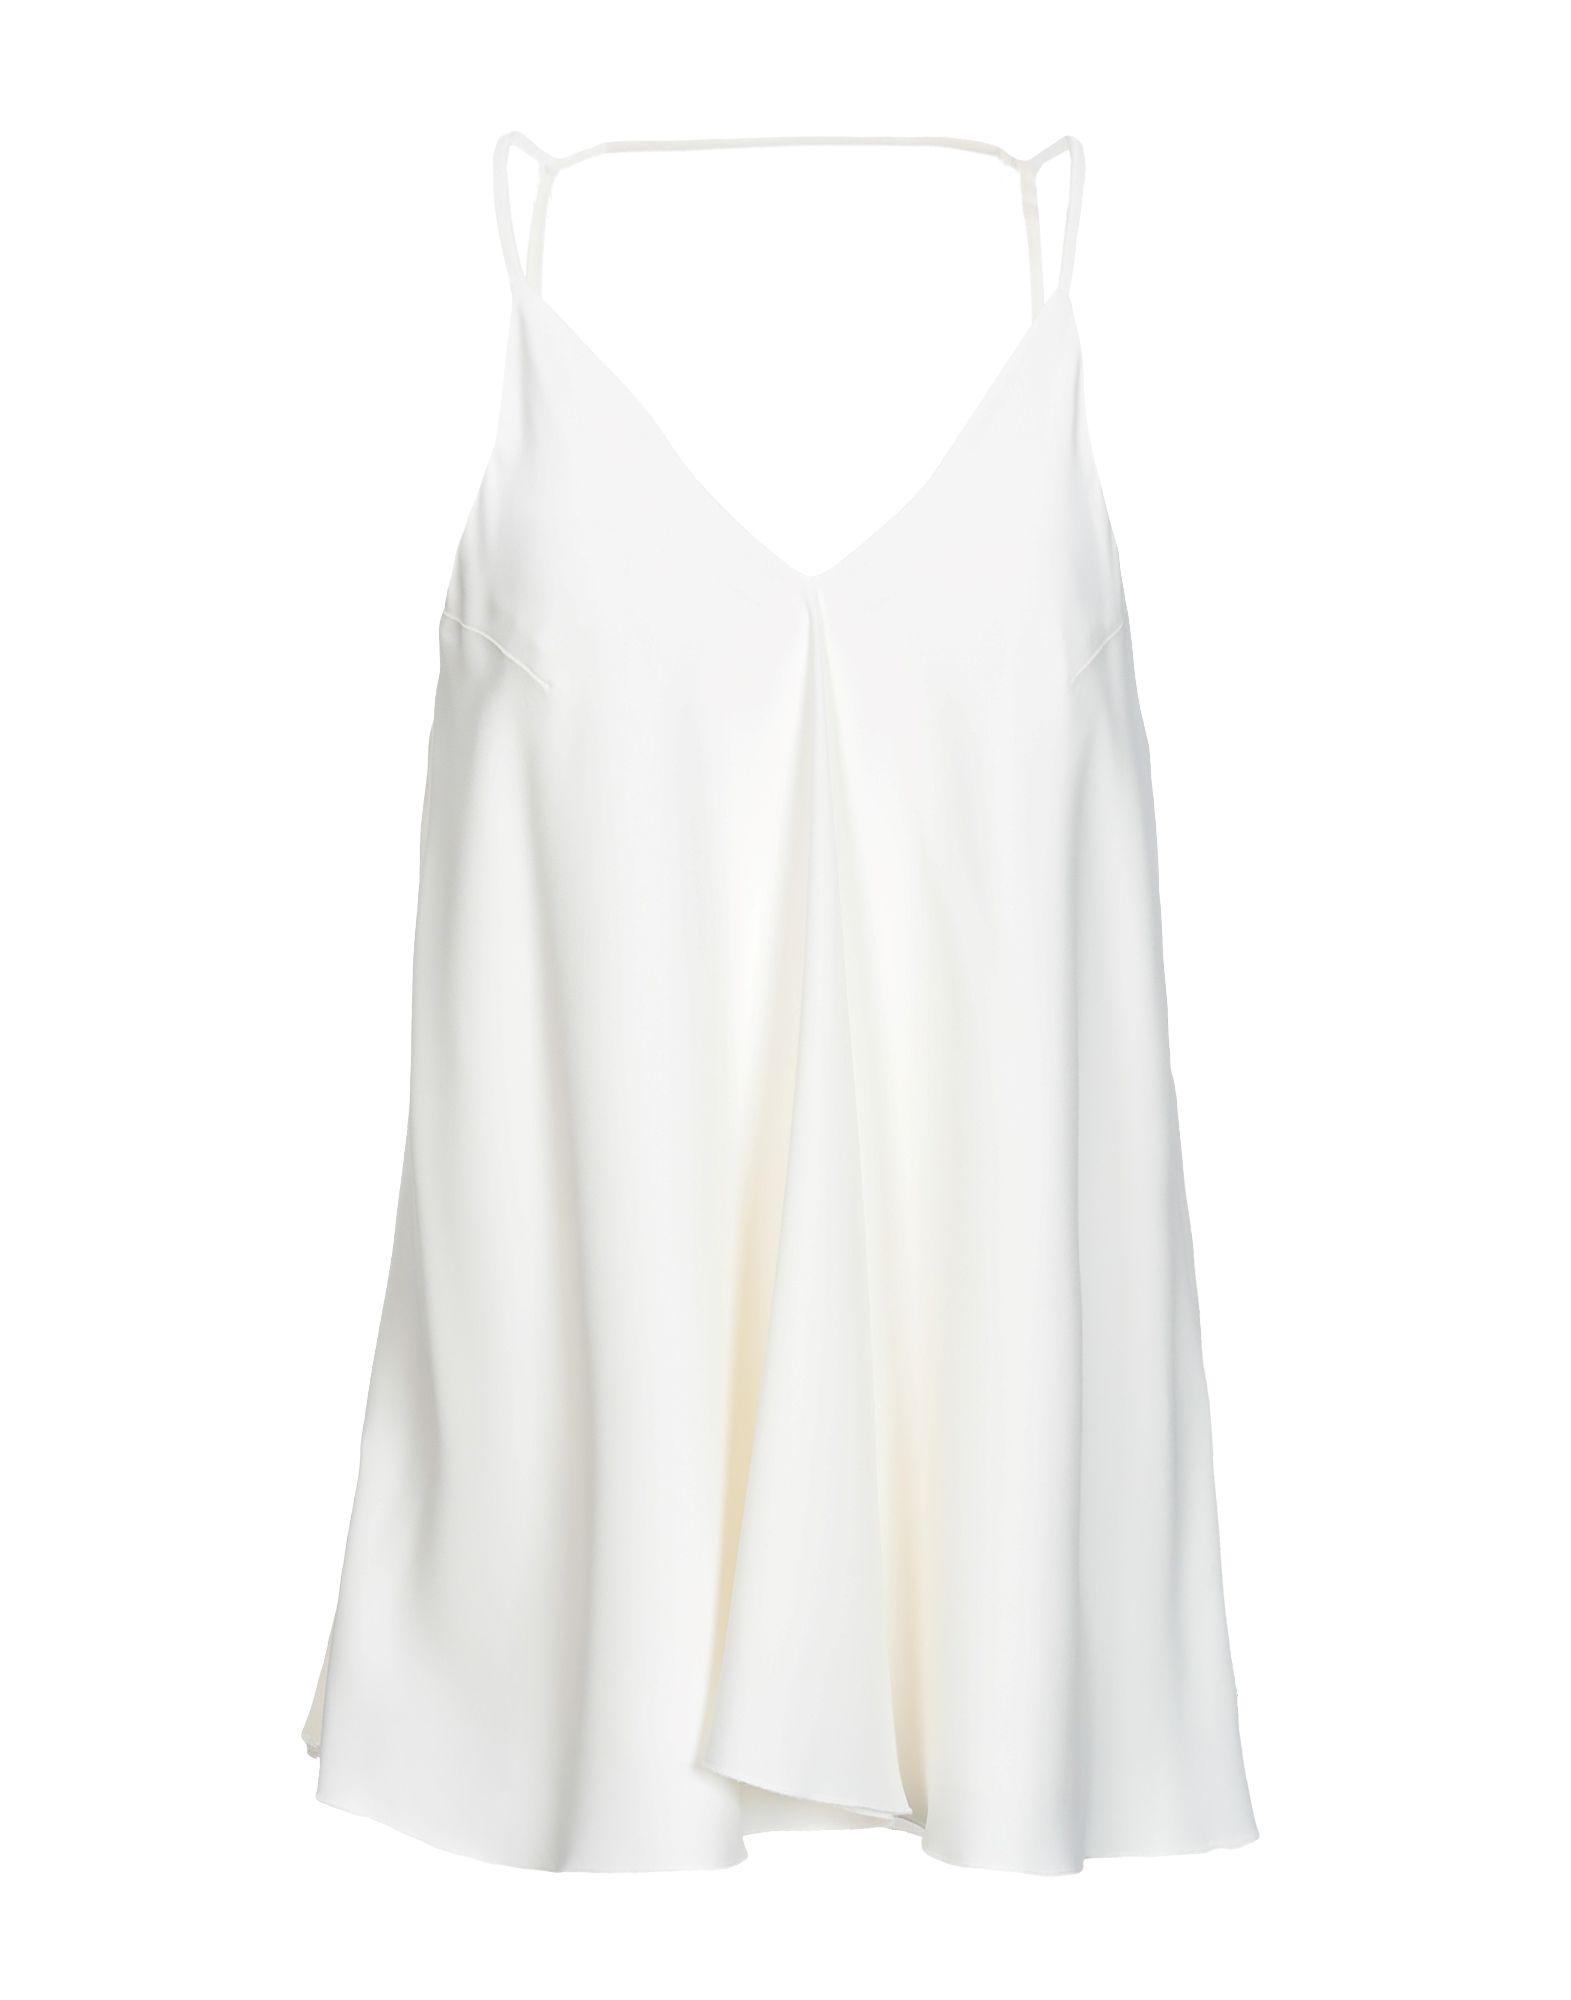 Dondup Synthetic Top in Ivory (White) - Lyst